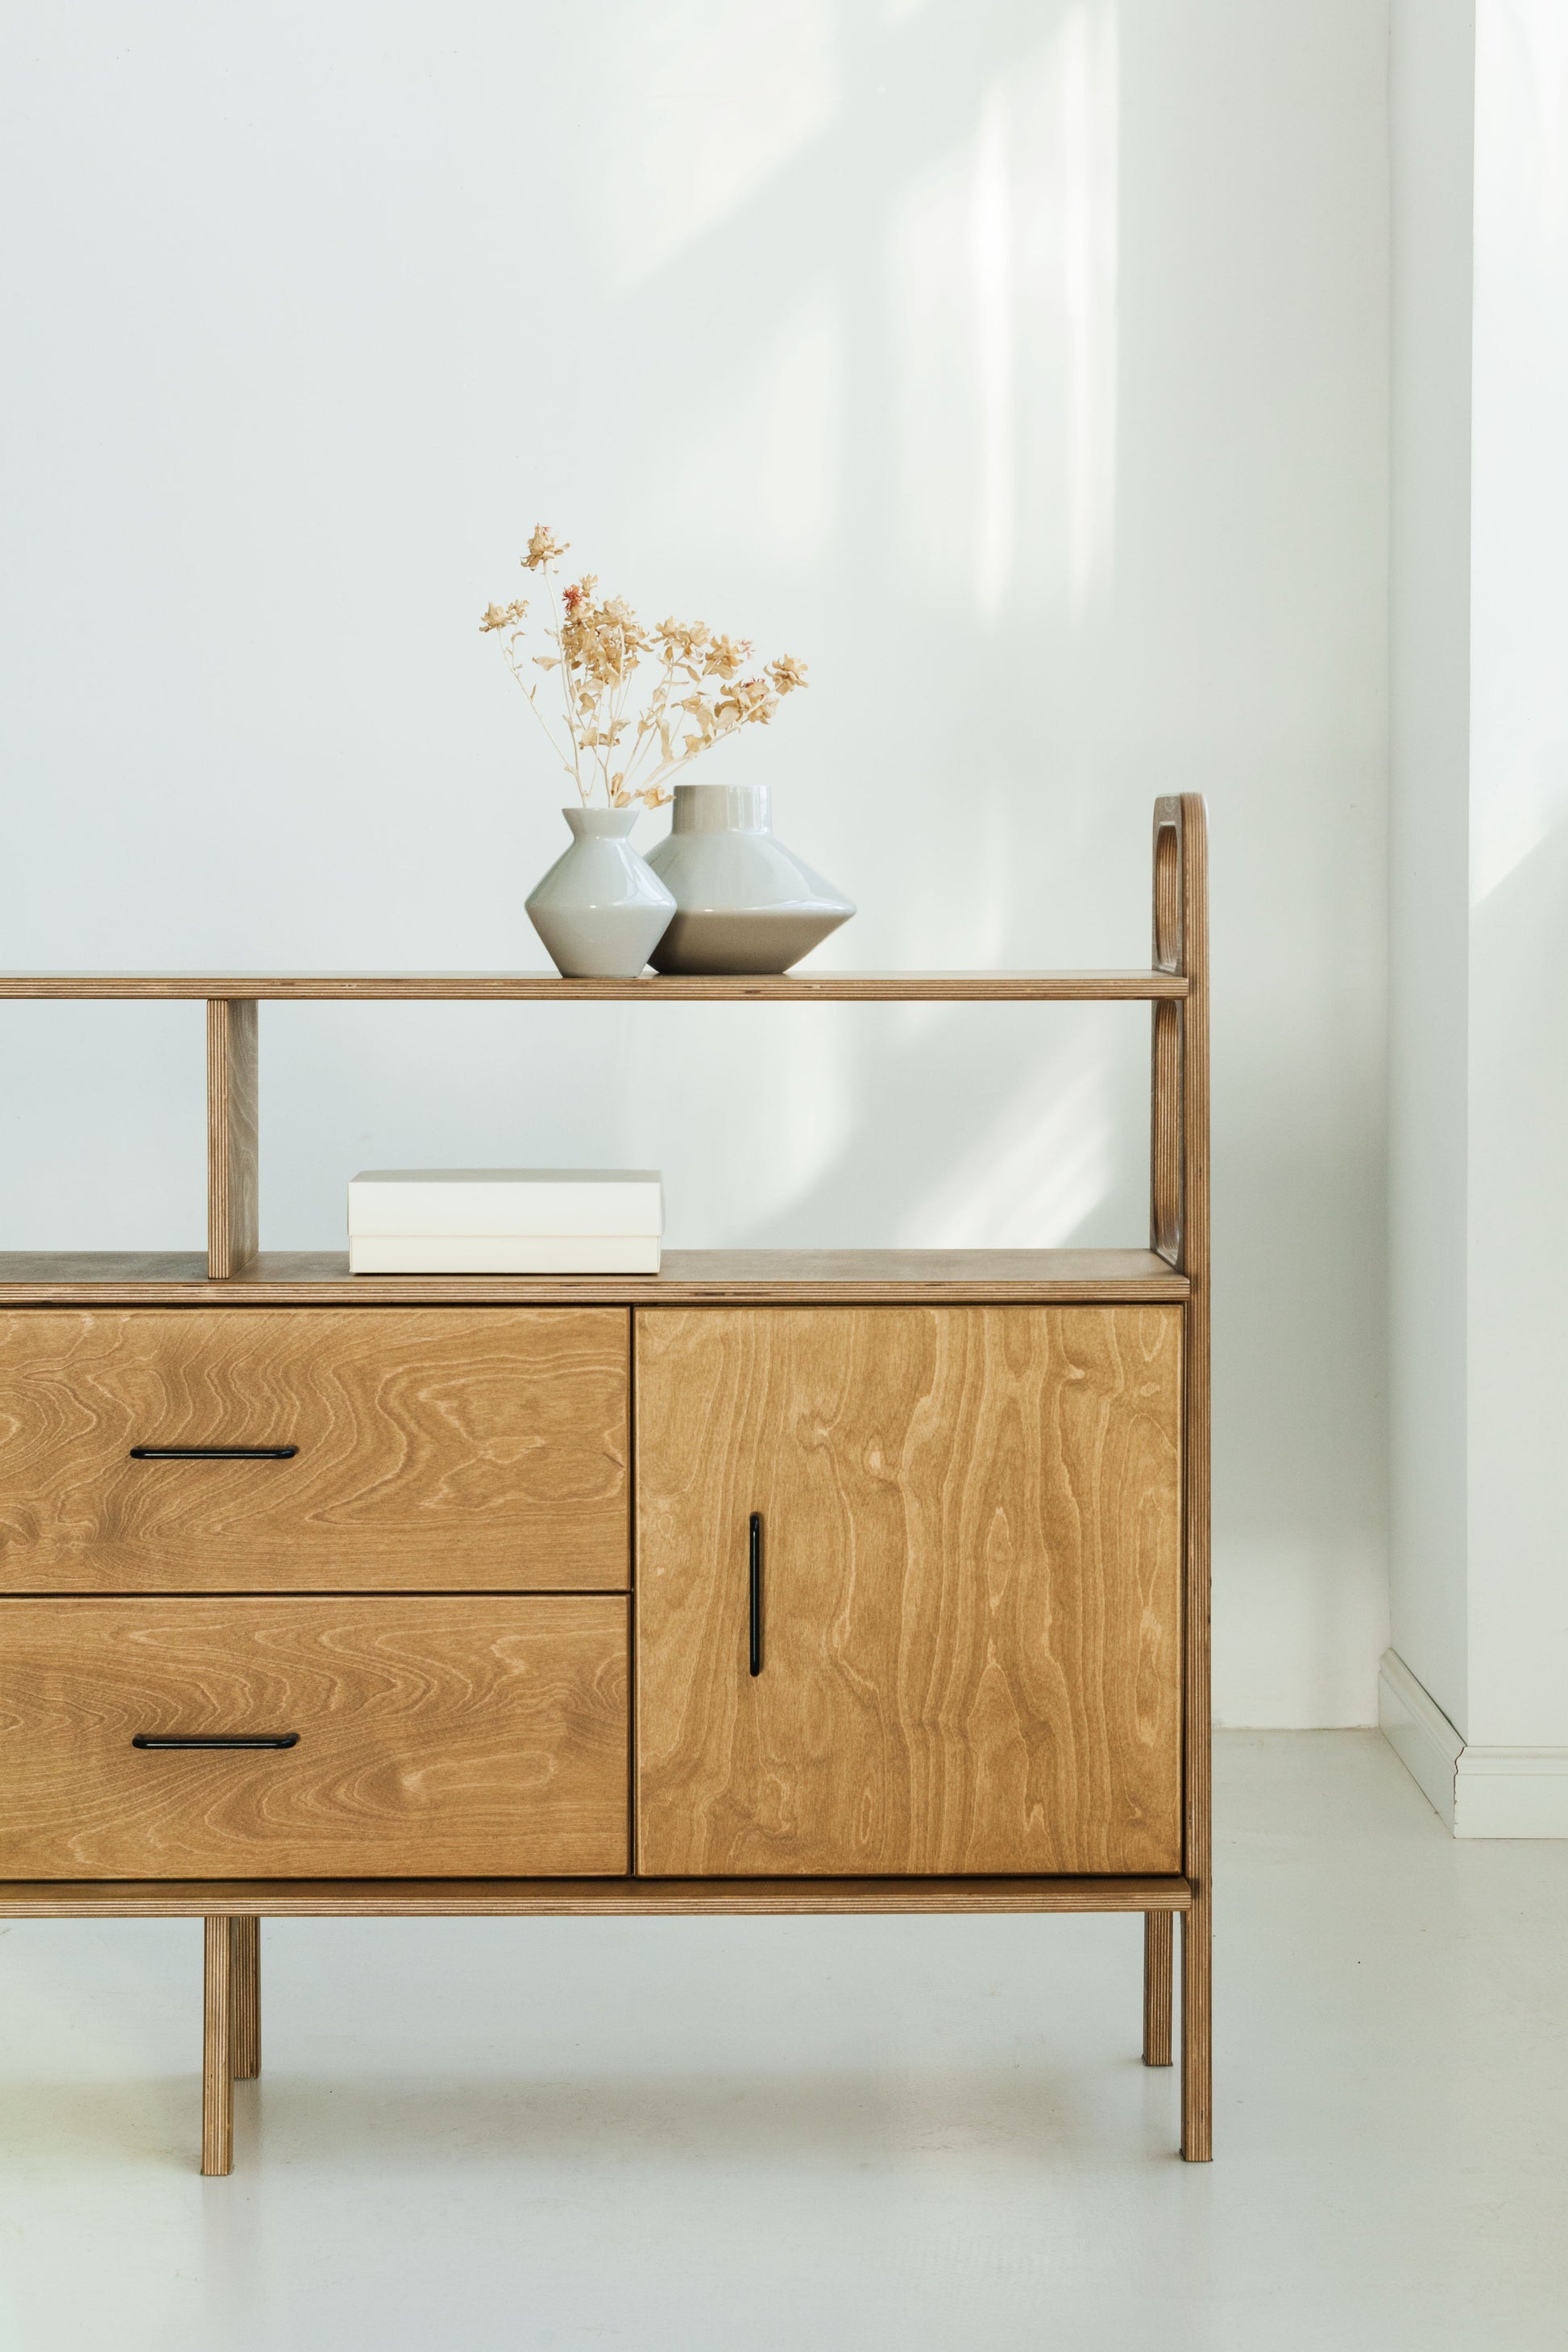 side-of-the-mid-century-modern-wooden-sideboard-oak-stain-with-cabinet-drawers-vinyl-storage